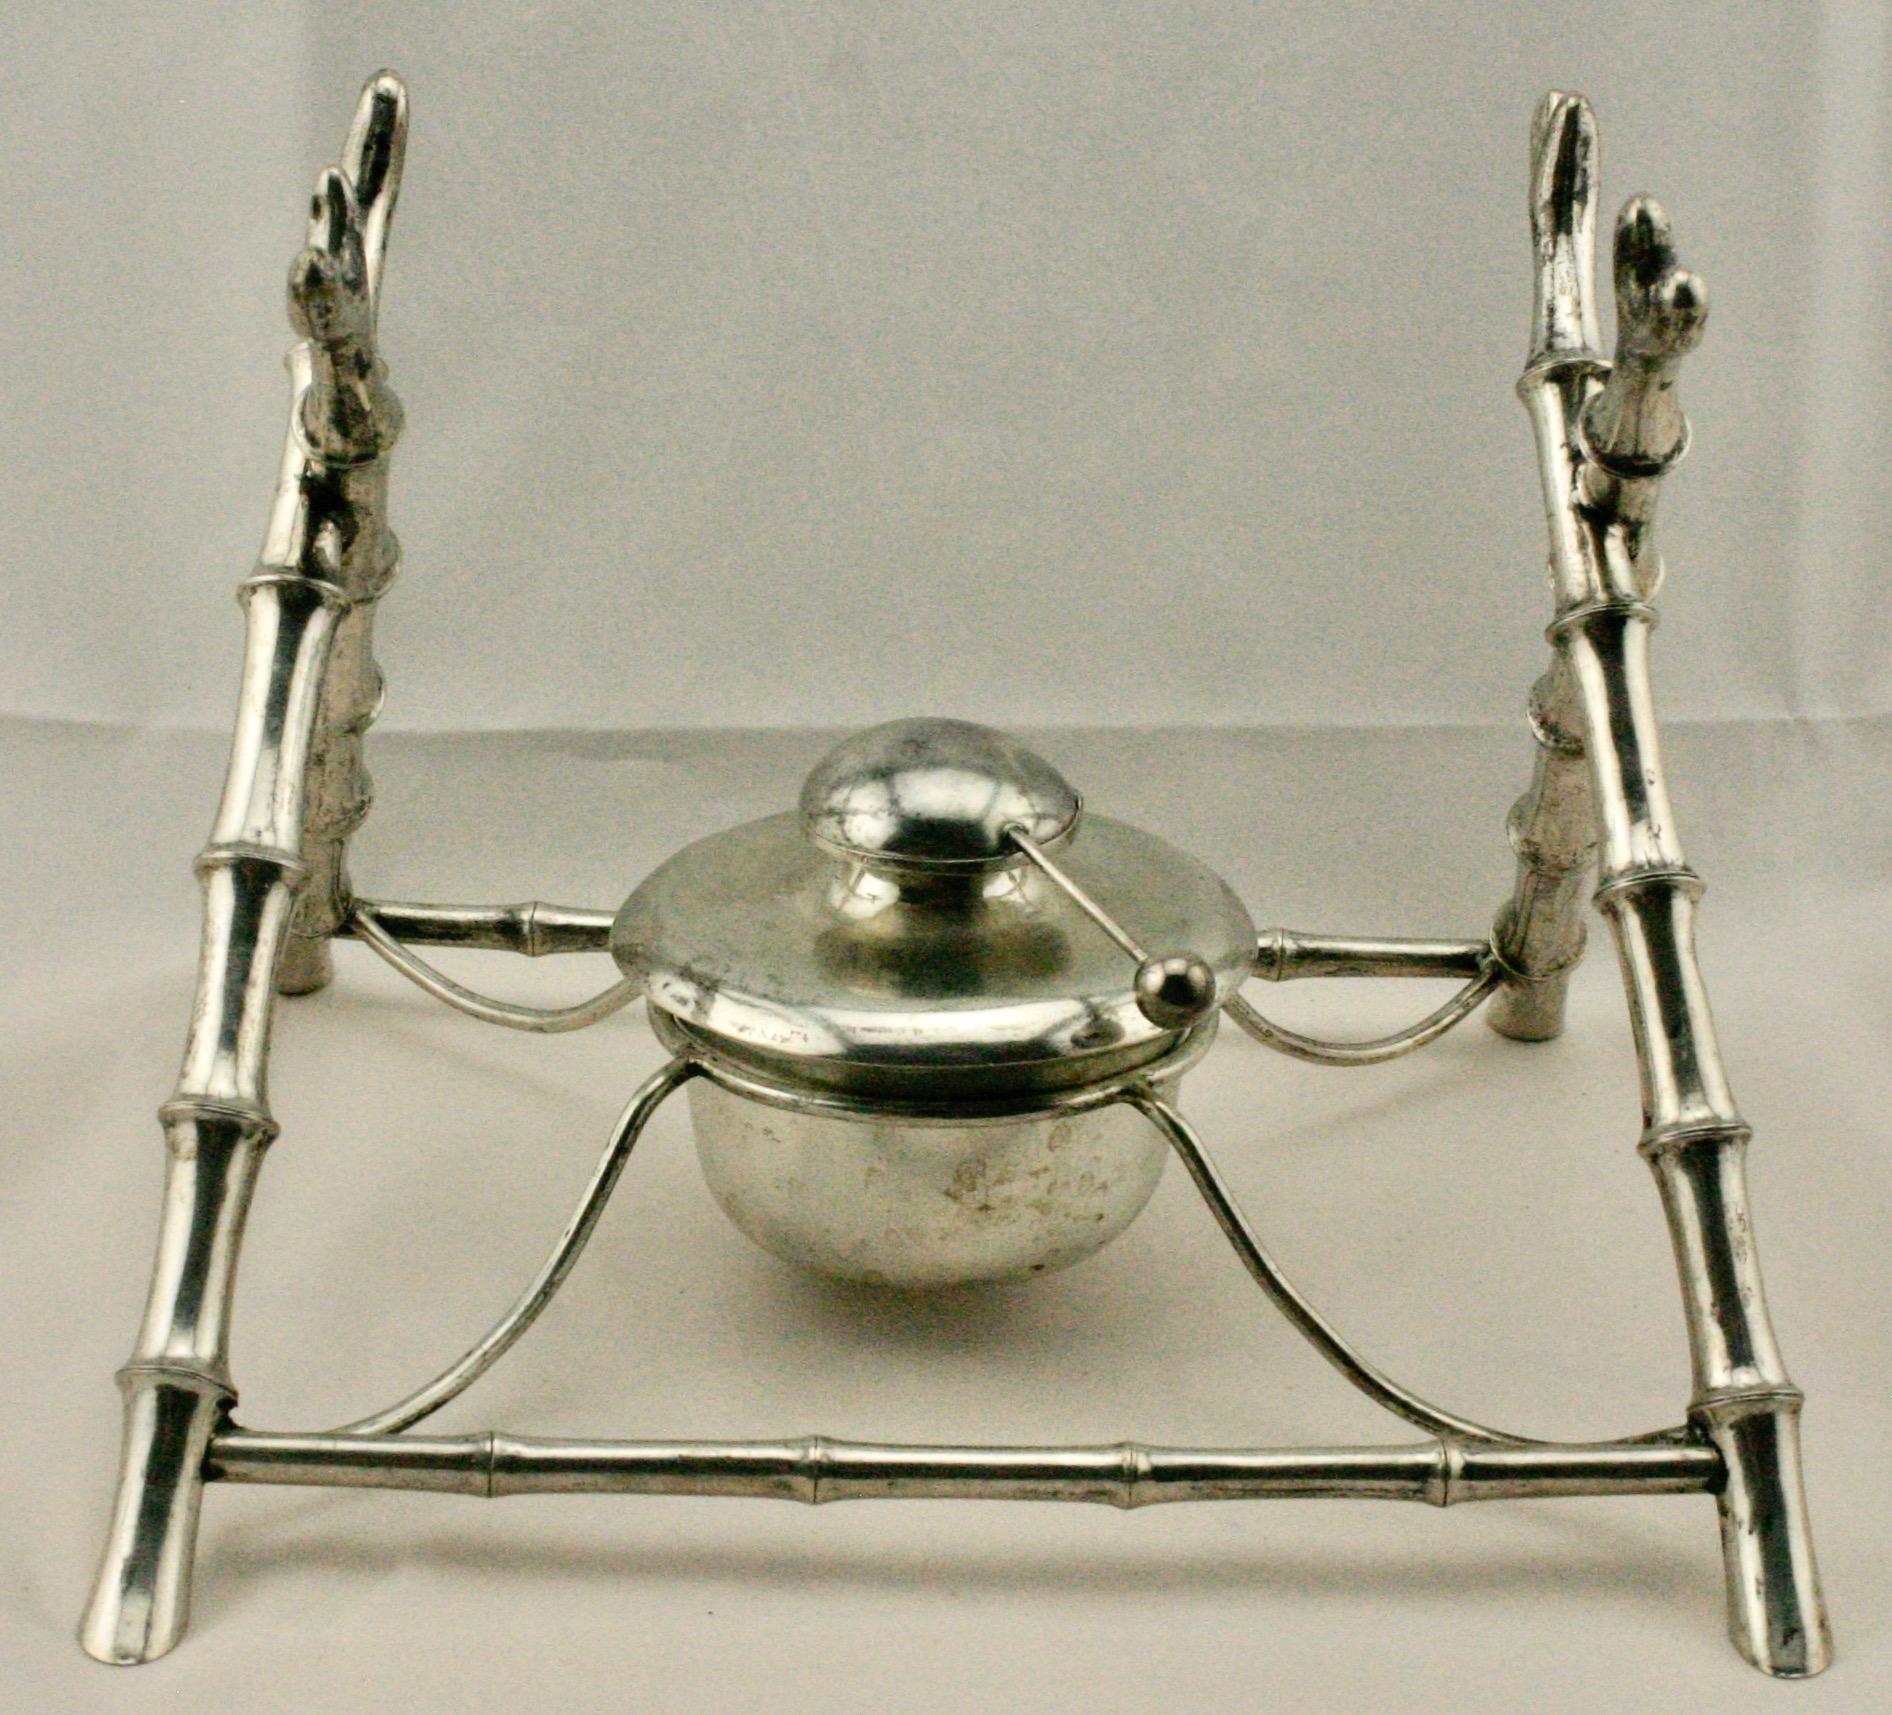 20th Century Chinese Export Silver Teapot or Kettle on a Stand by Leeching, circa 1900 For Sale